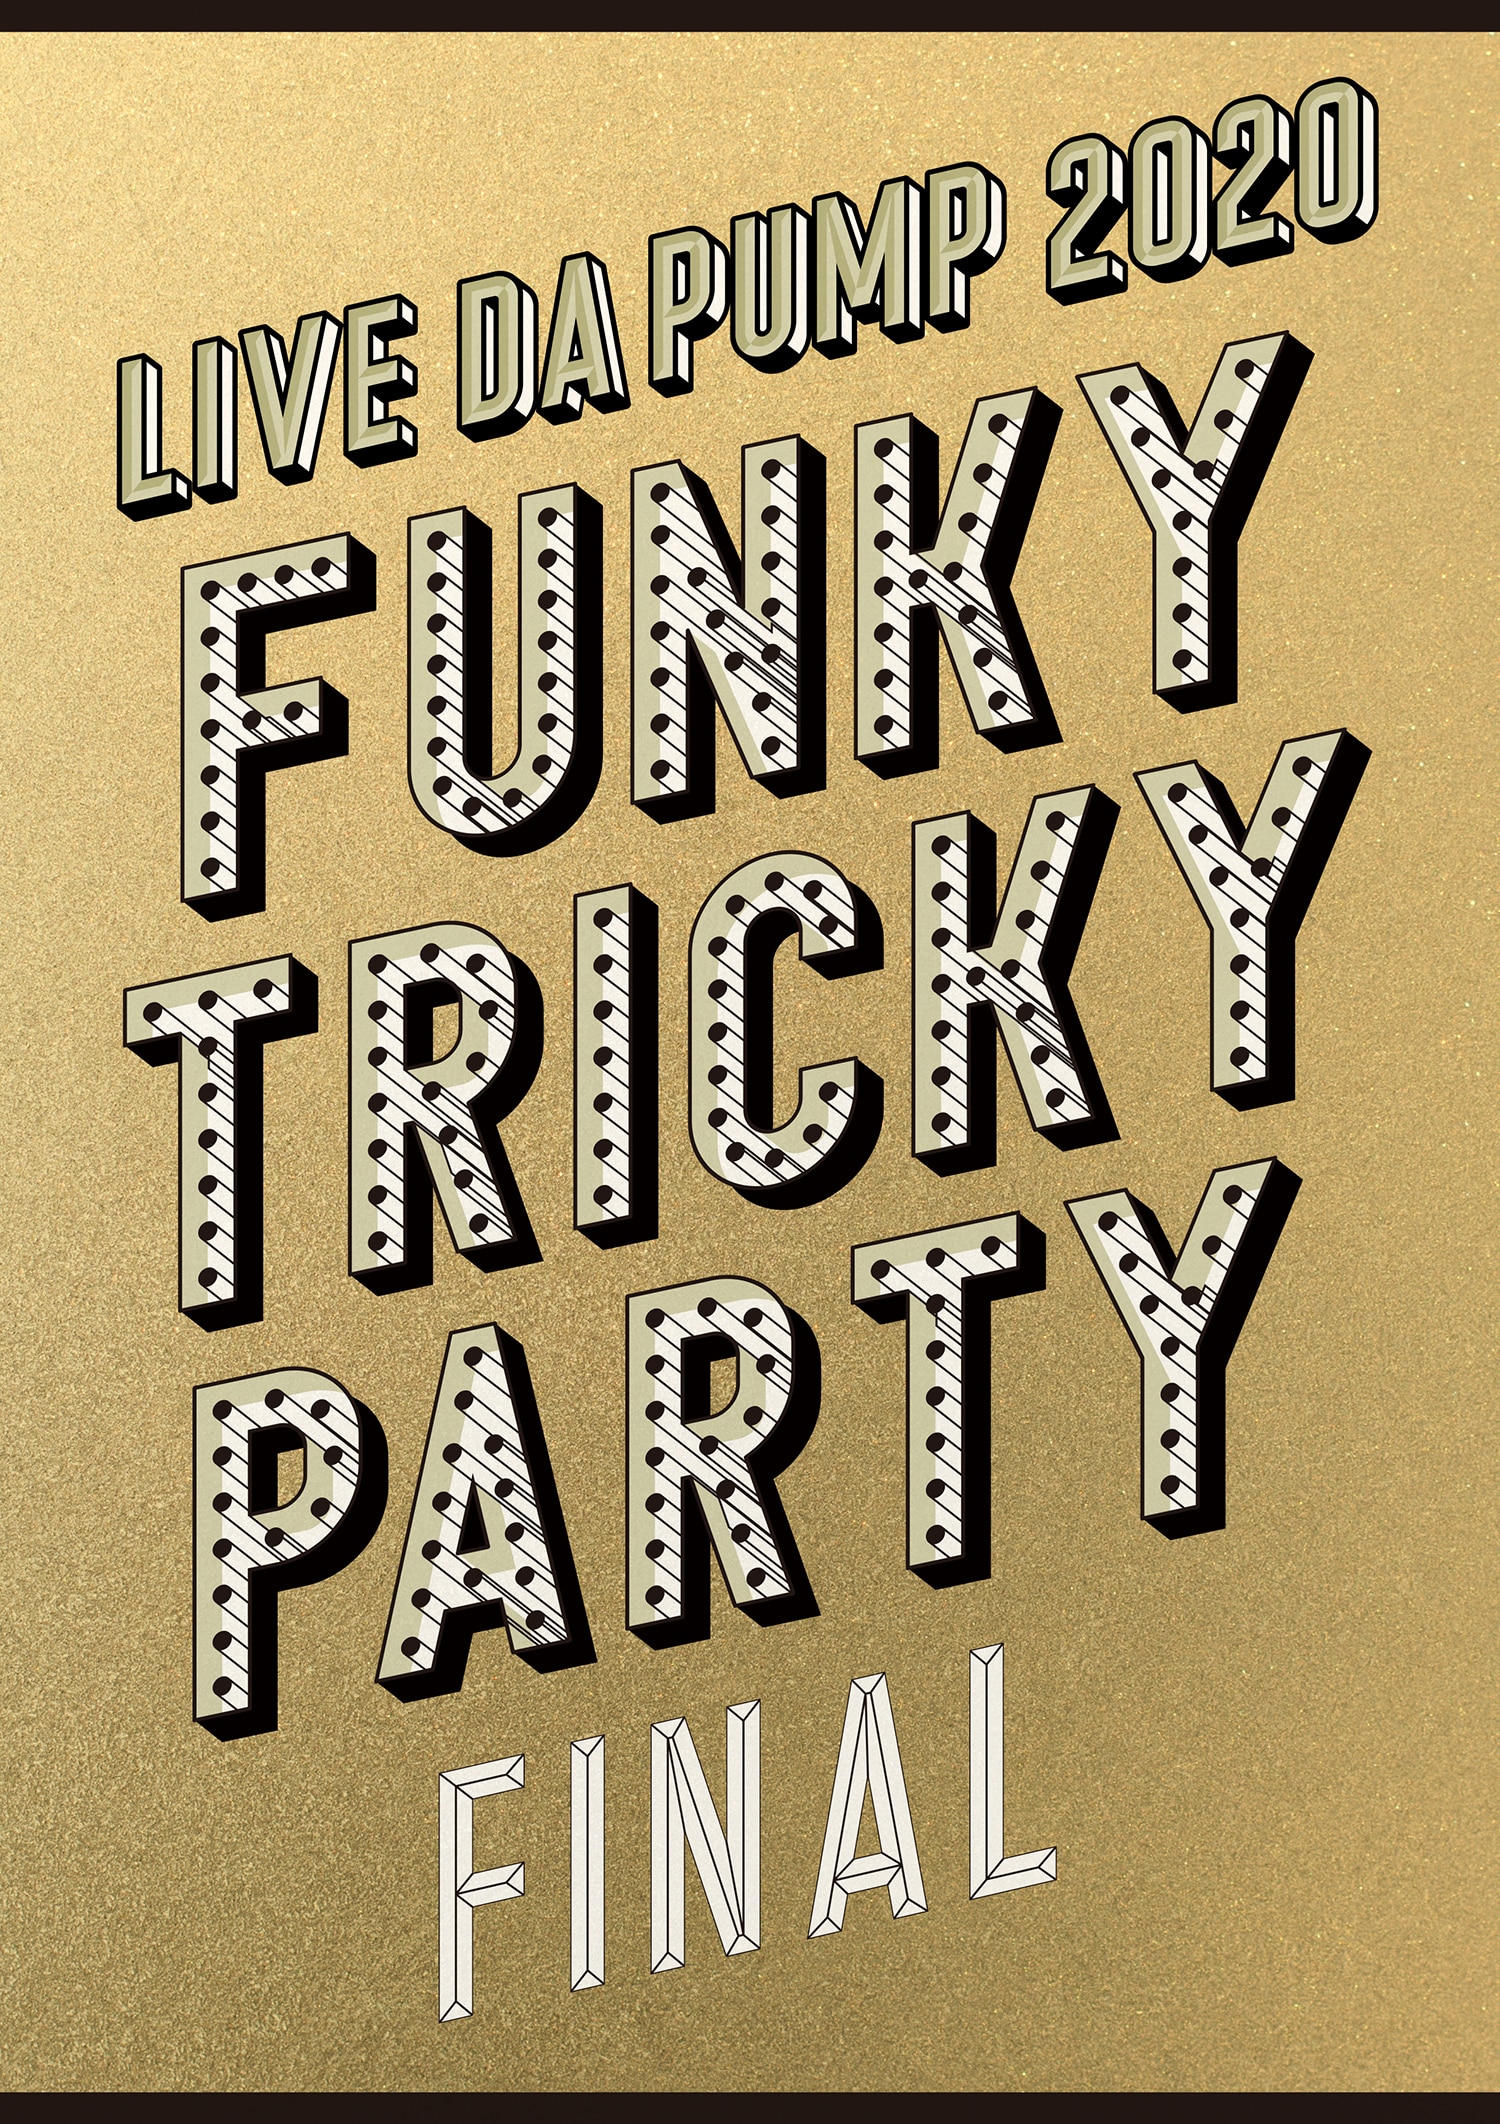 [2Blu-ray Disc＋スマプラ・ムービー]「LIVE DA PUMP 2020 Funky Tricky Party FINAL at さいたまスーパーアリーナ」
